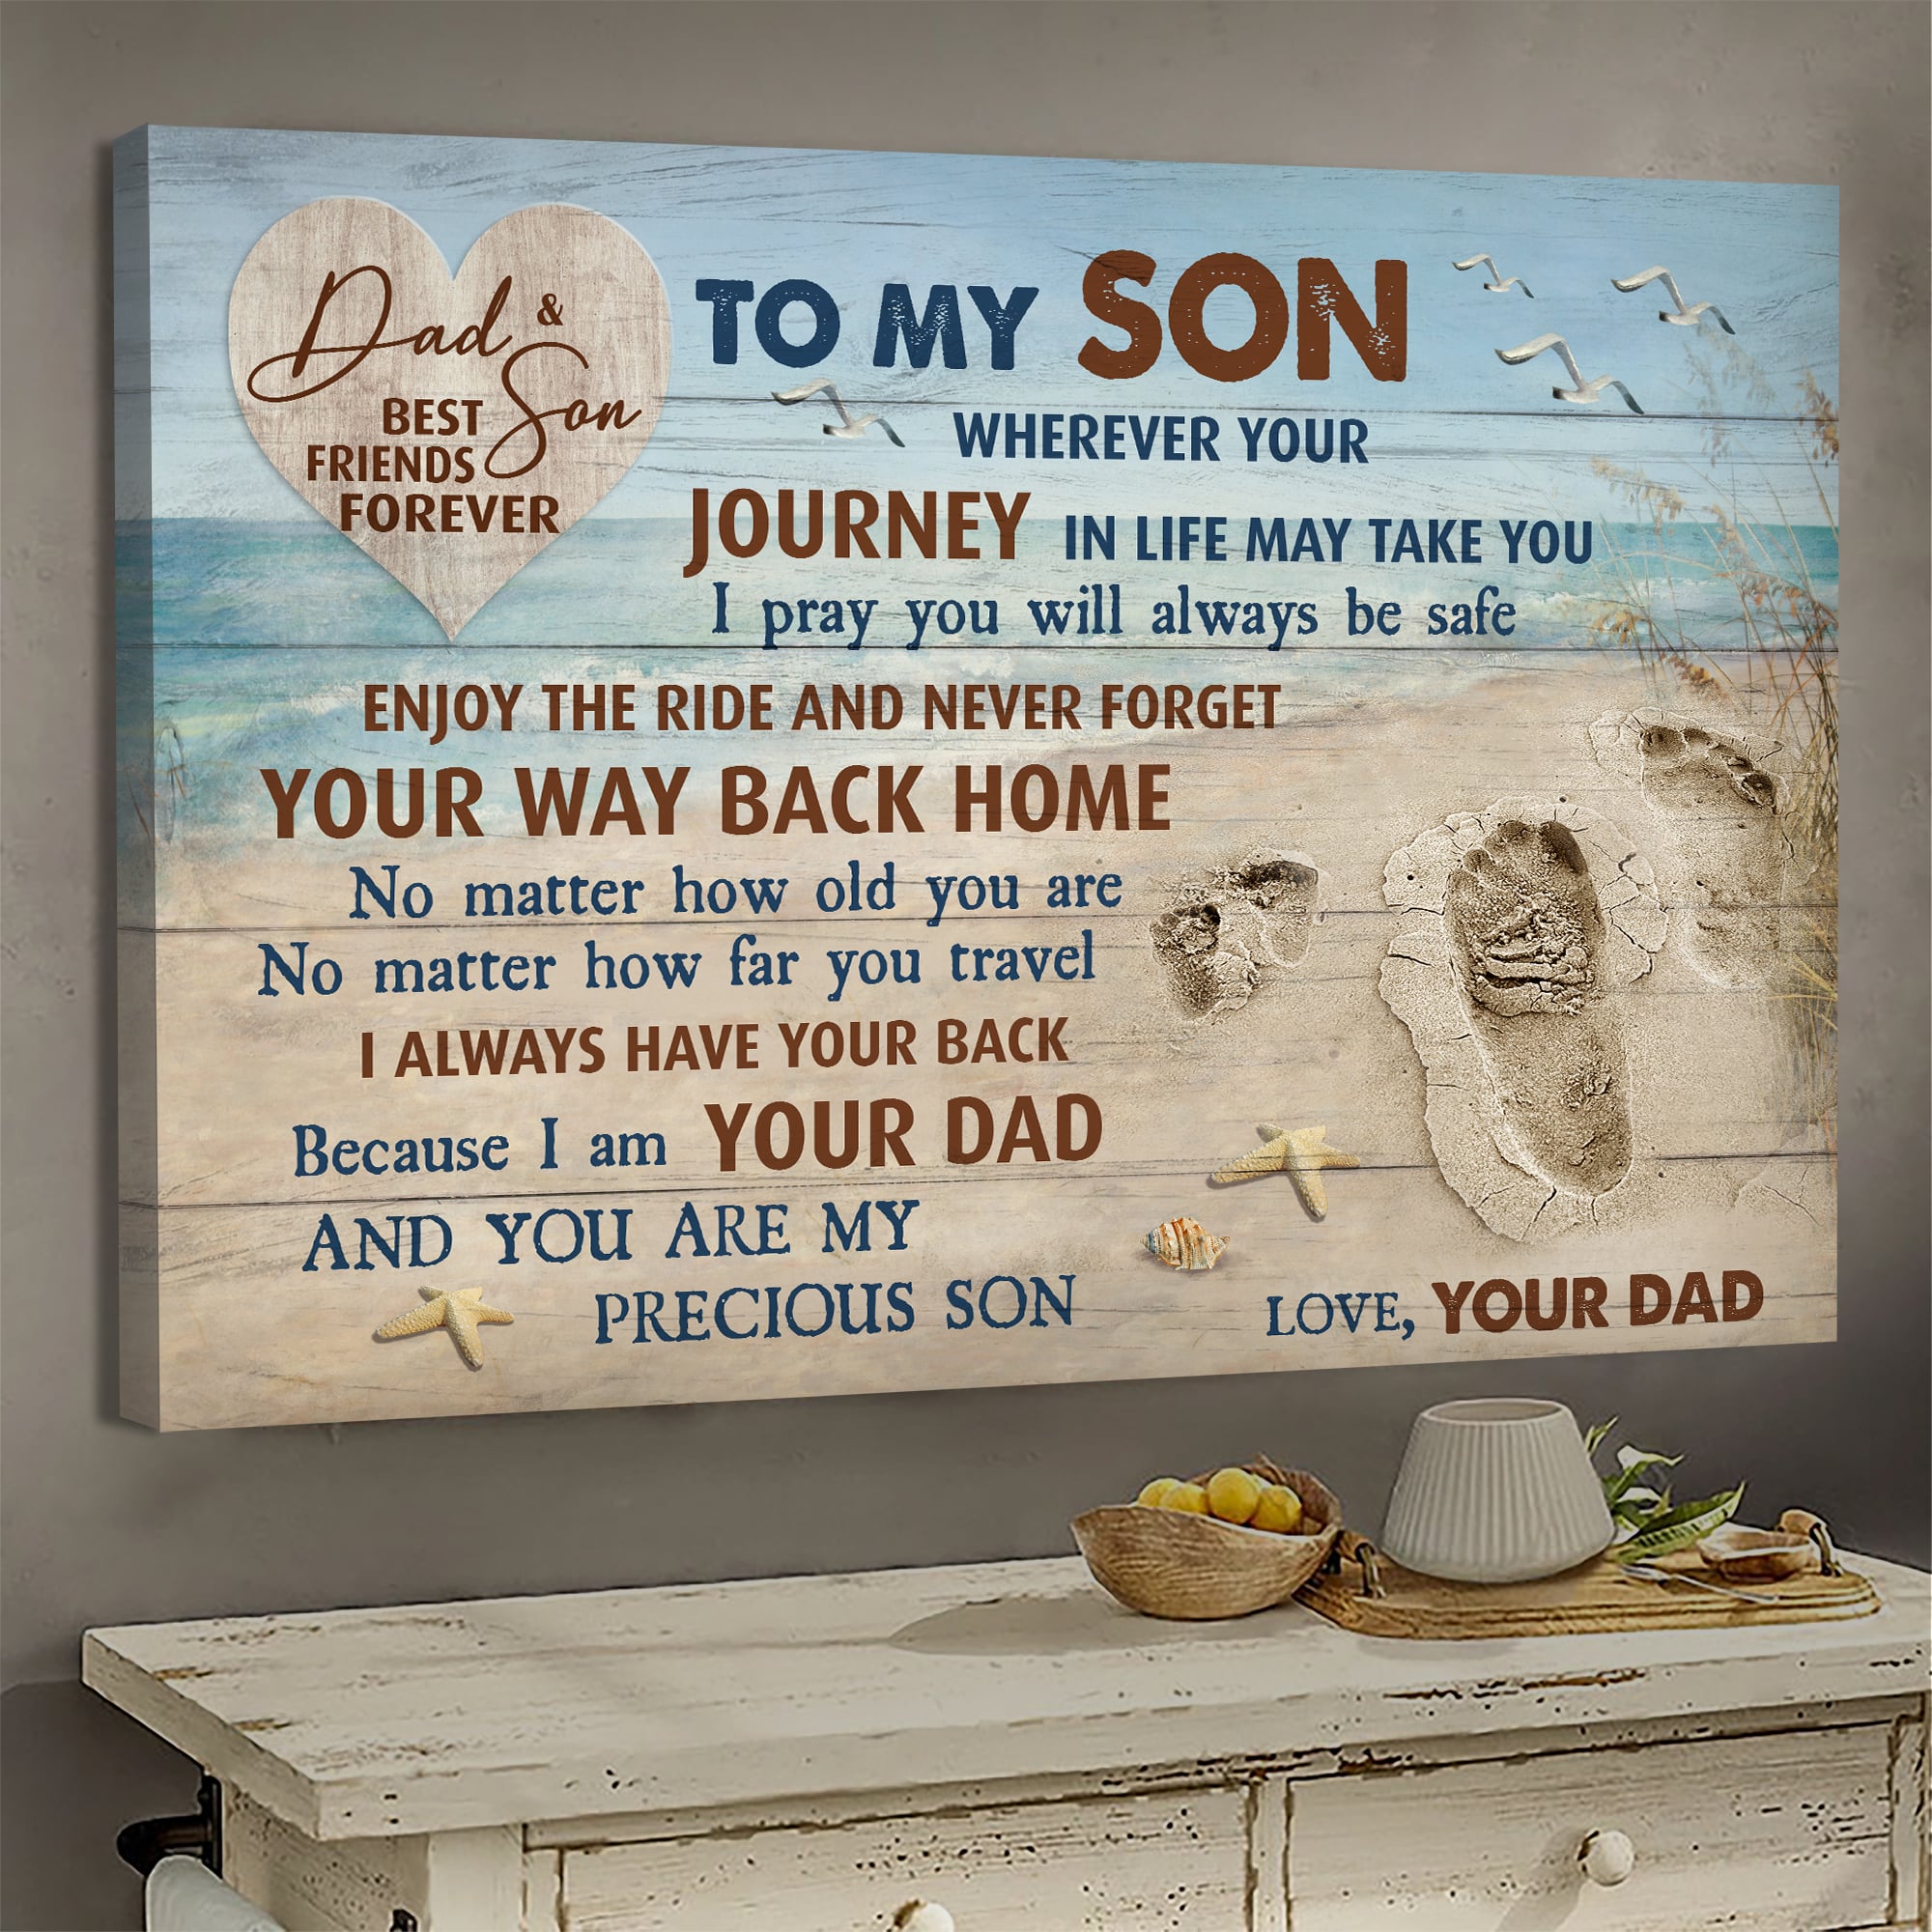 Dad to son - Footprint on the beach - Enjoy the ride and don't forget your way back home - Family Landscape Canvas Print - Wall Art